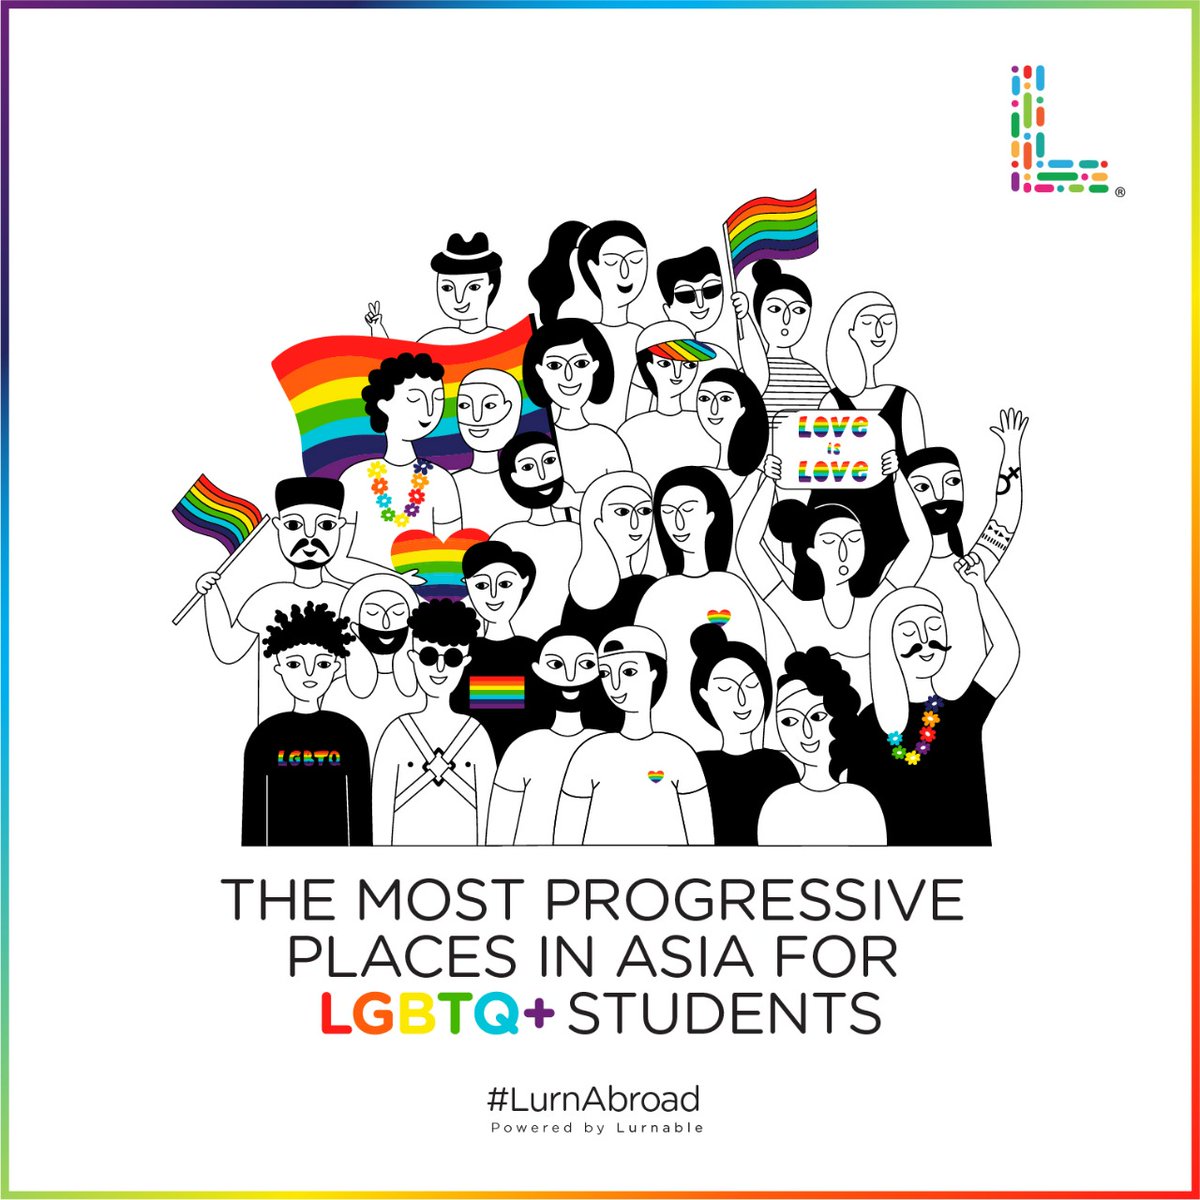 LGBTQ+ rights differ greatly across the globe. Therefore, if you are an LGBTQ+ person, it is very important to take this into consideration.. bit.ly/3lS431V 

#lgbtq #studyabroad #studyinasia #lgbt #educationforall #internationaleducation #highereducation #lgbtqrights